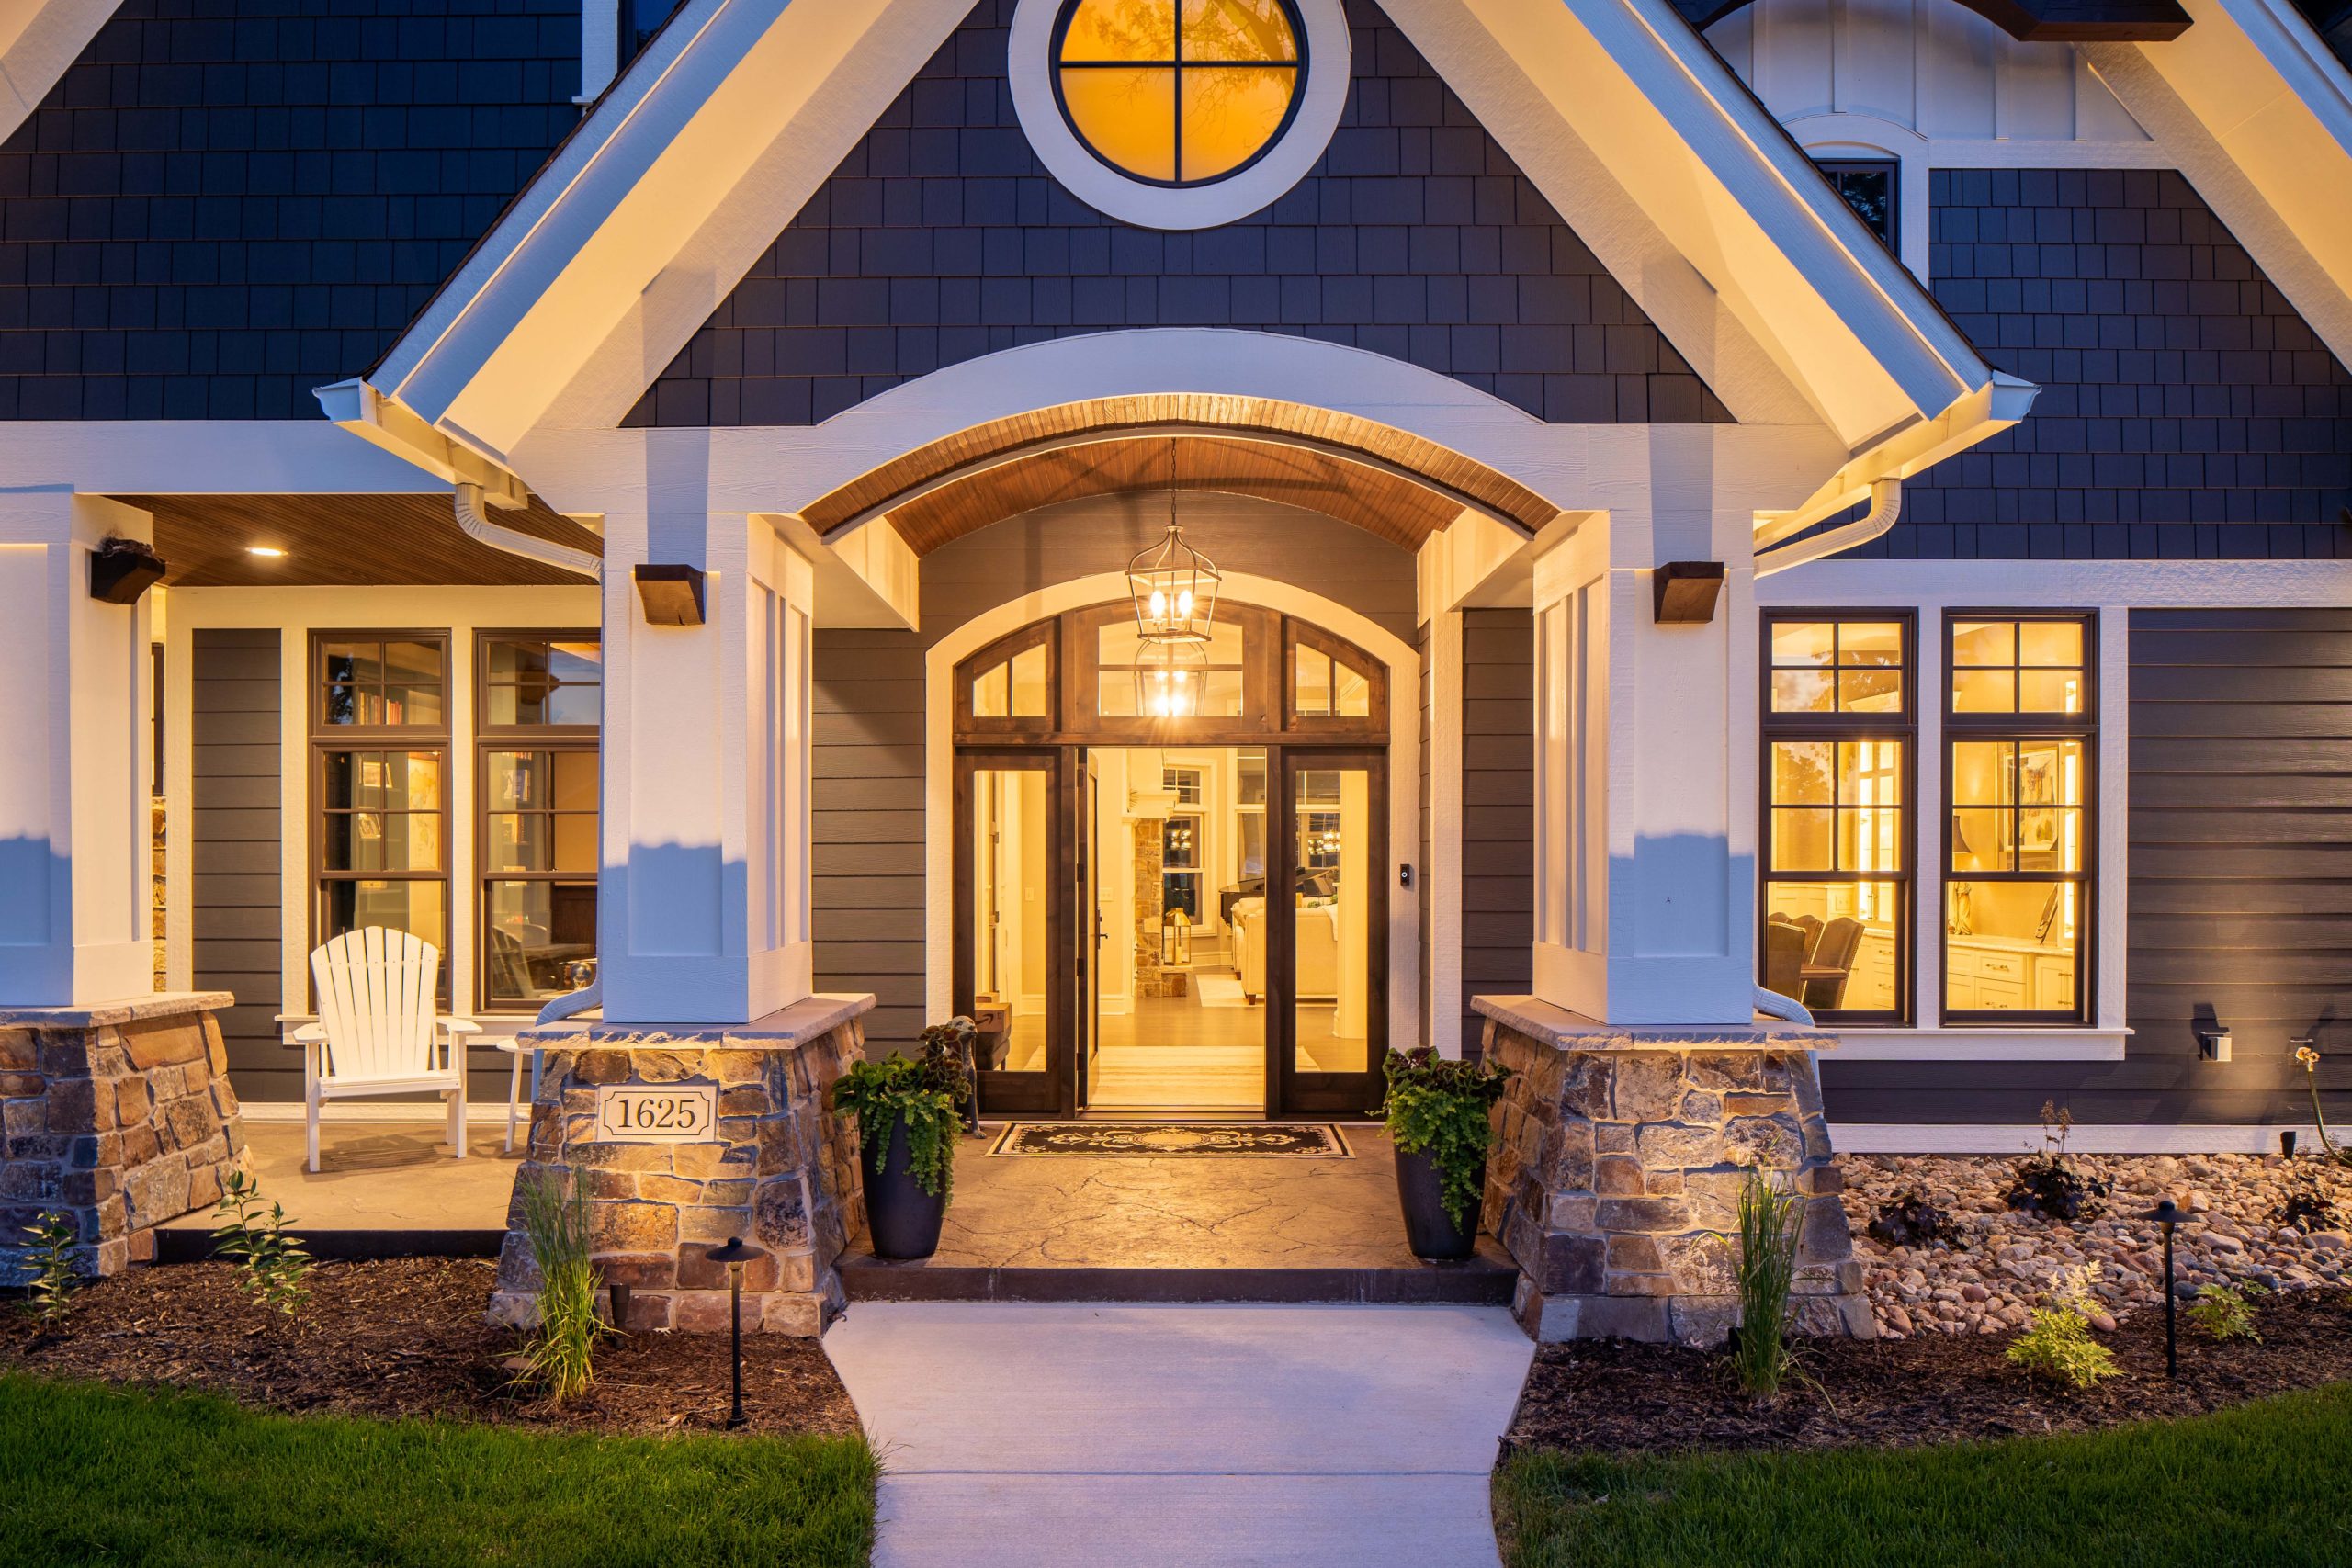 The Lake Escape custom home remodel featuring a front porch illuminated at night.